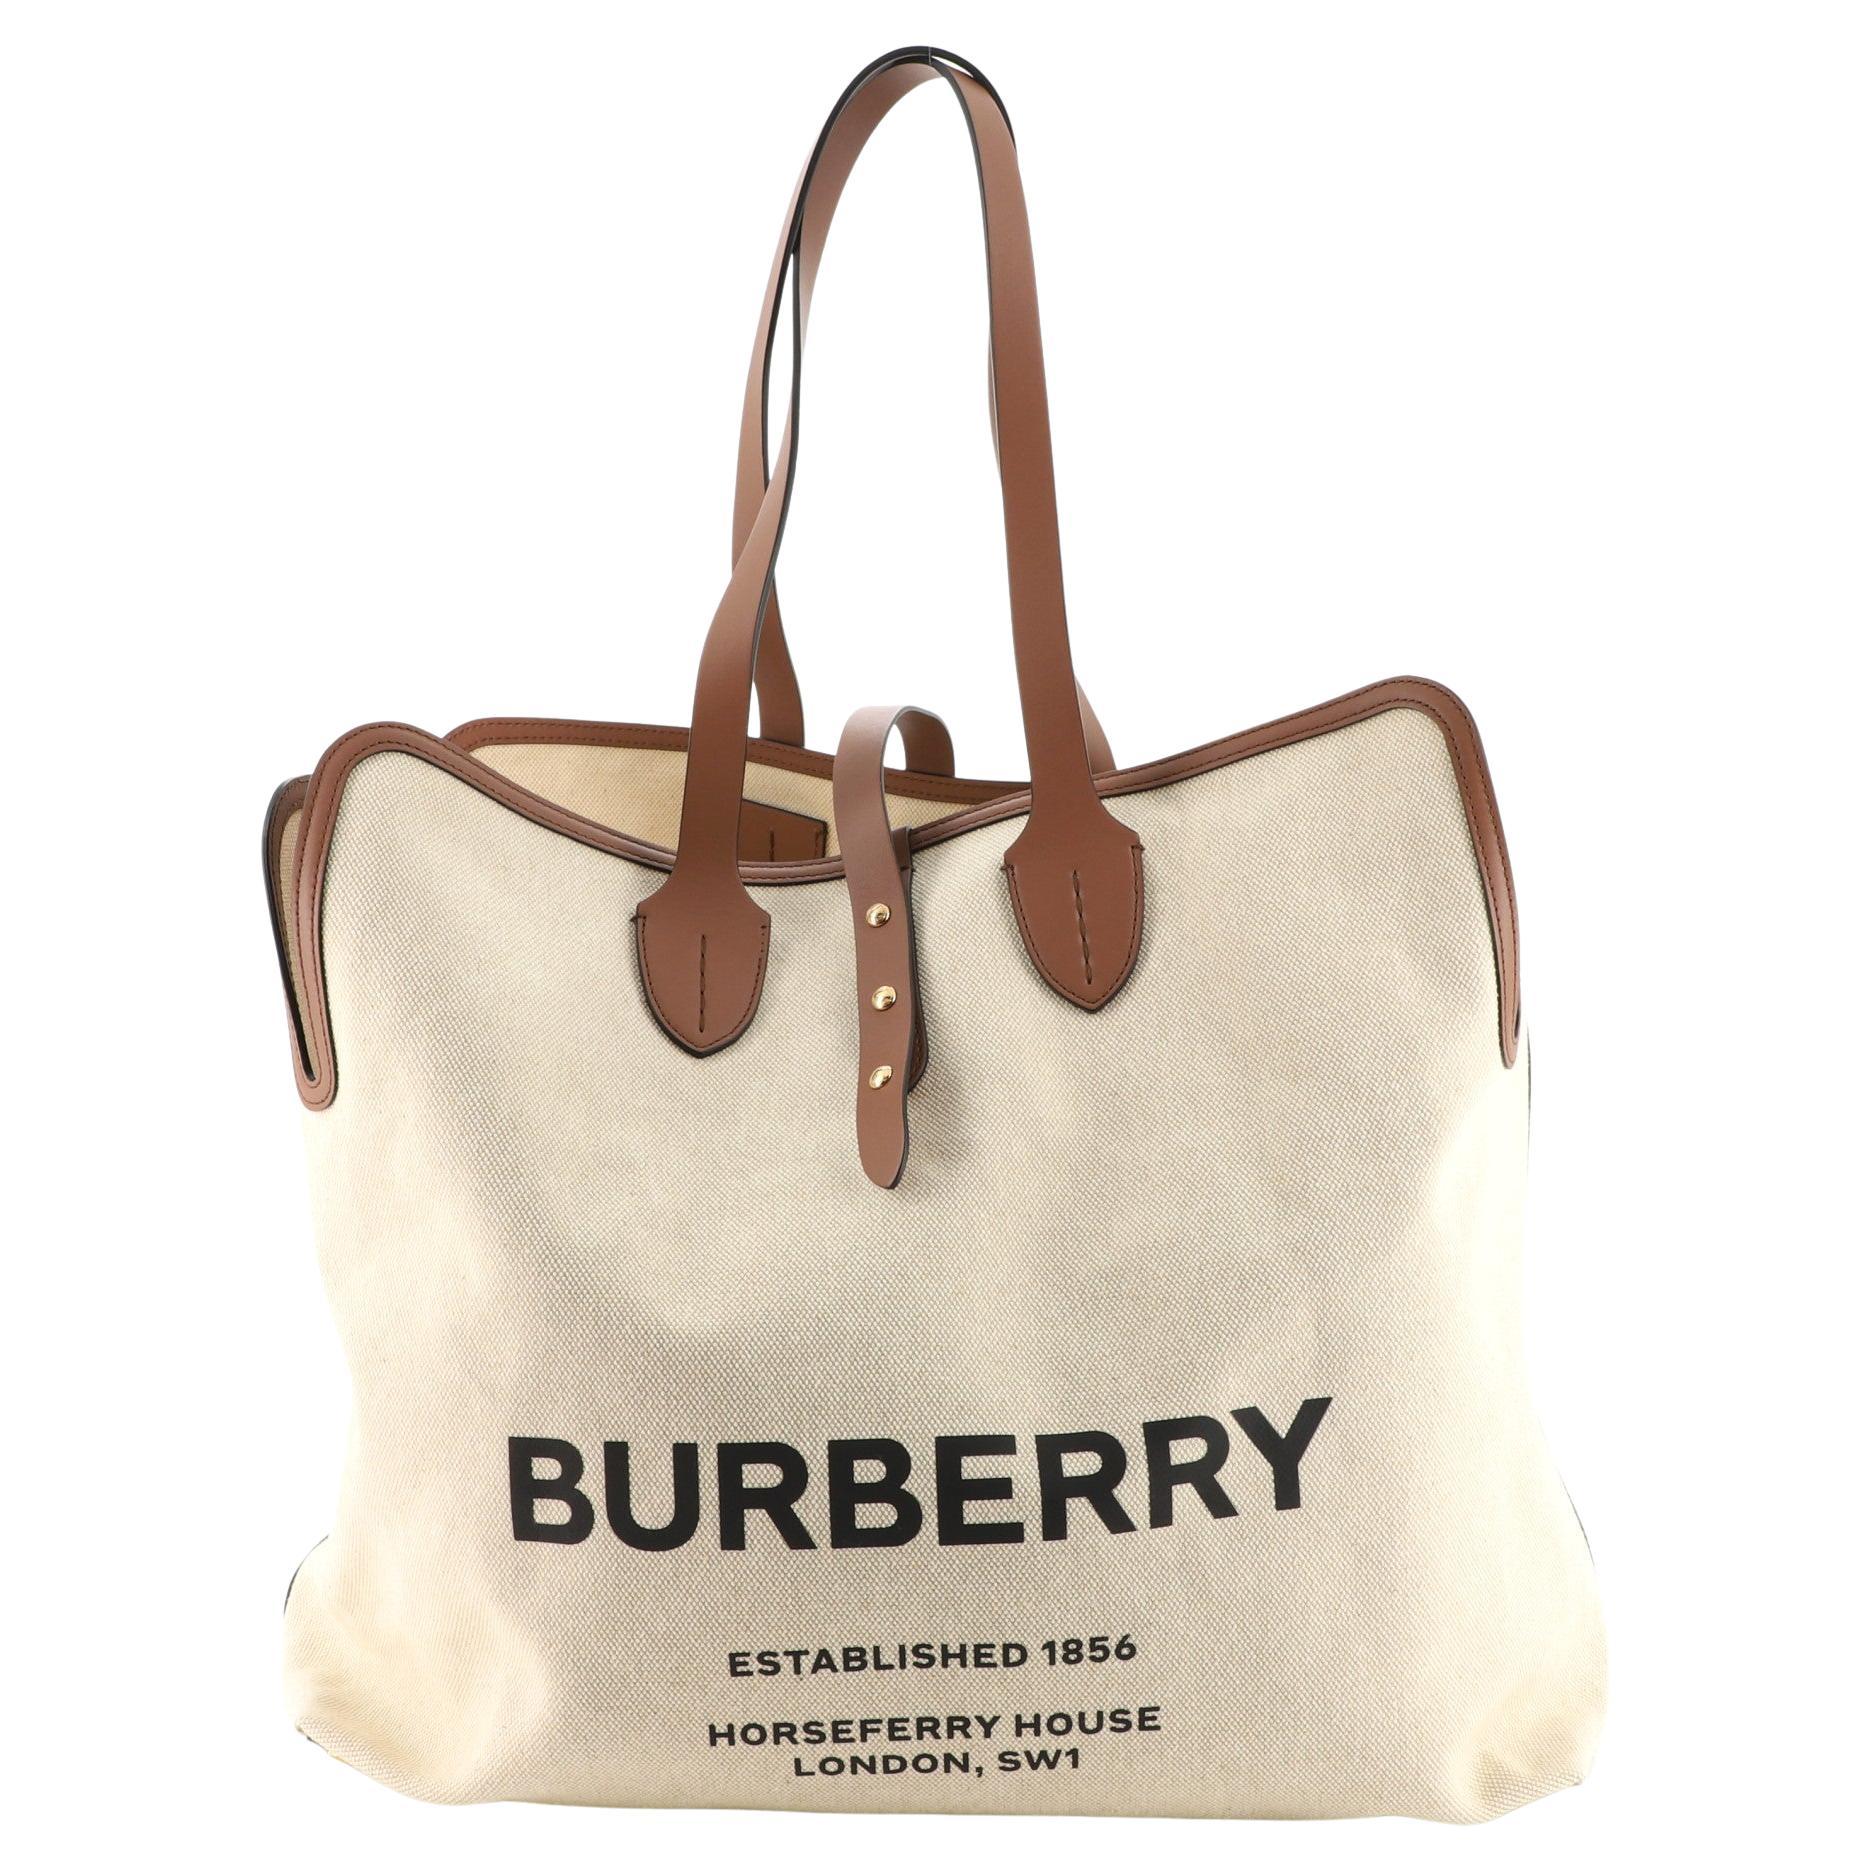 Horseferry Canvas Tote Bag in Multicoloured - Burberry